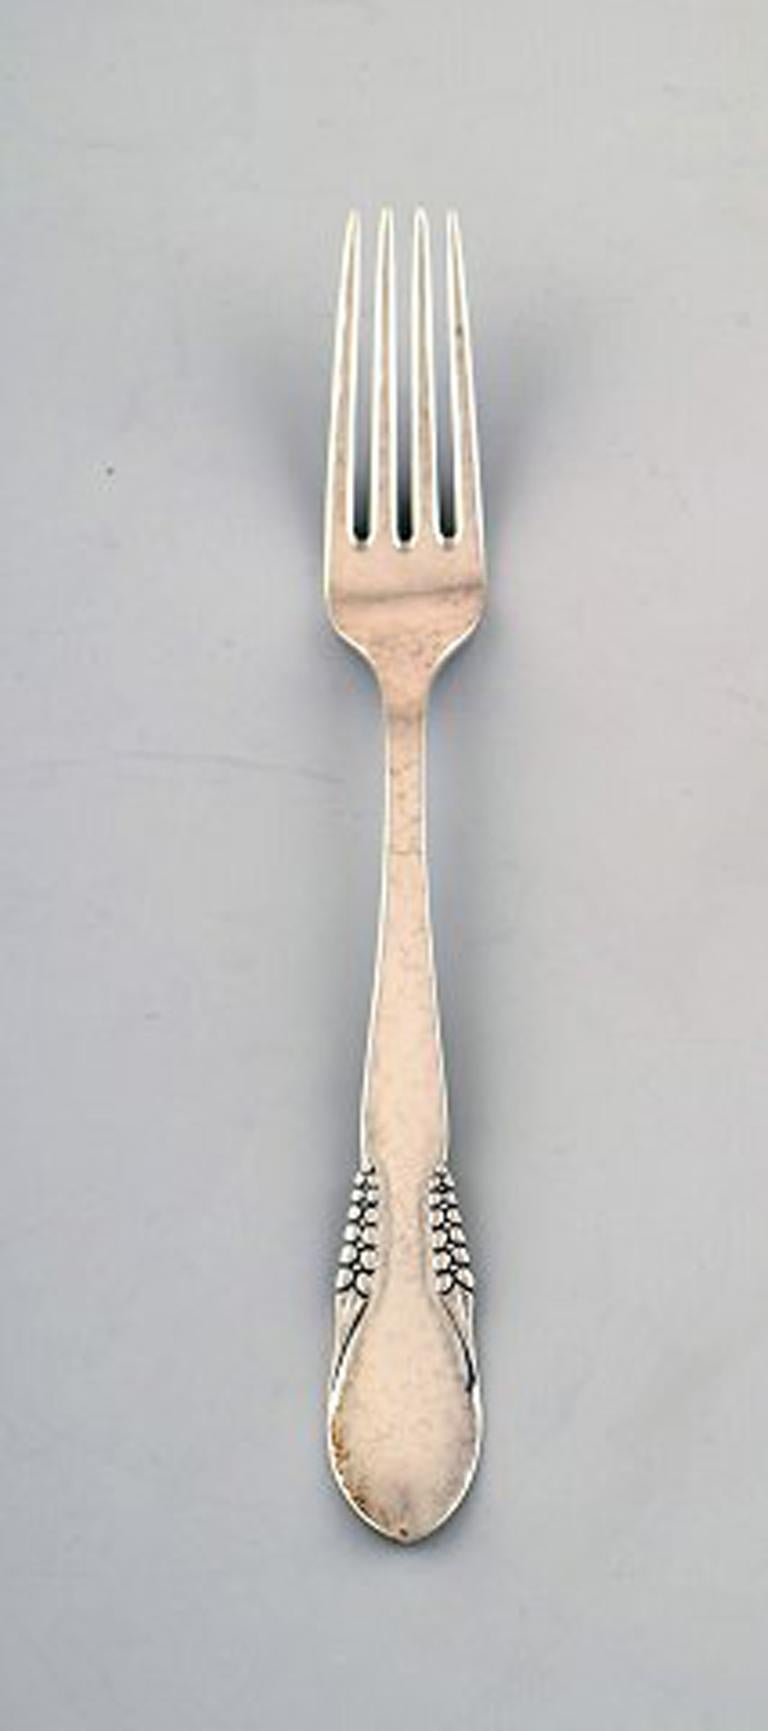 Danish silver (0.830), 12 dinner forks.
Stamped: CFH: Christian Fr. Heise, 1920s-1930s.
In very good condition.
Measures 18 cm.